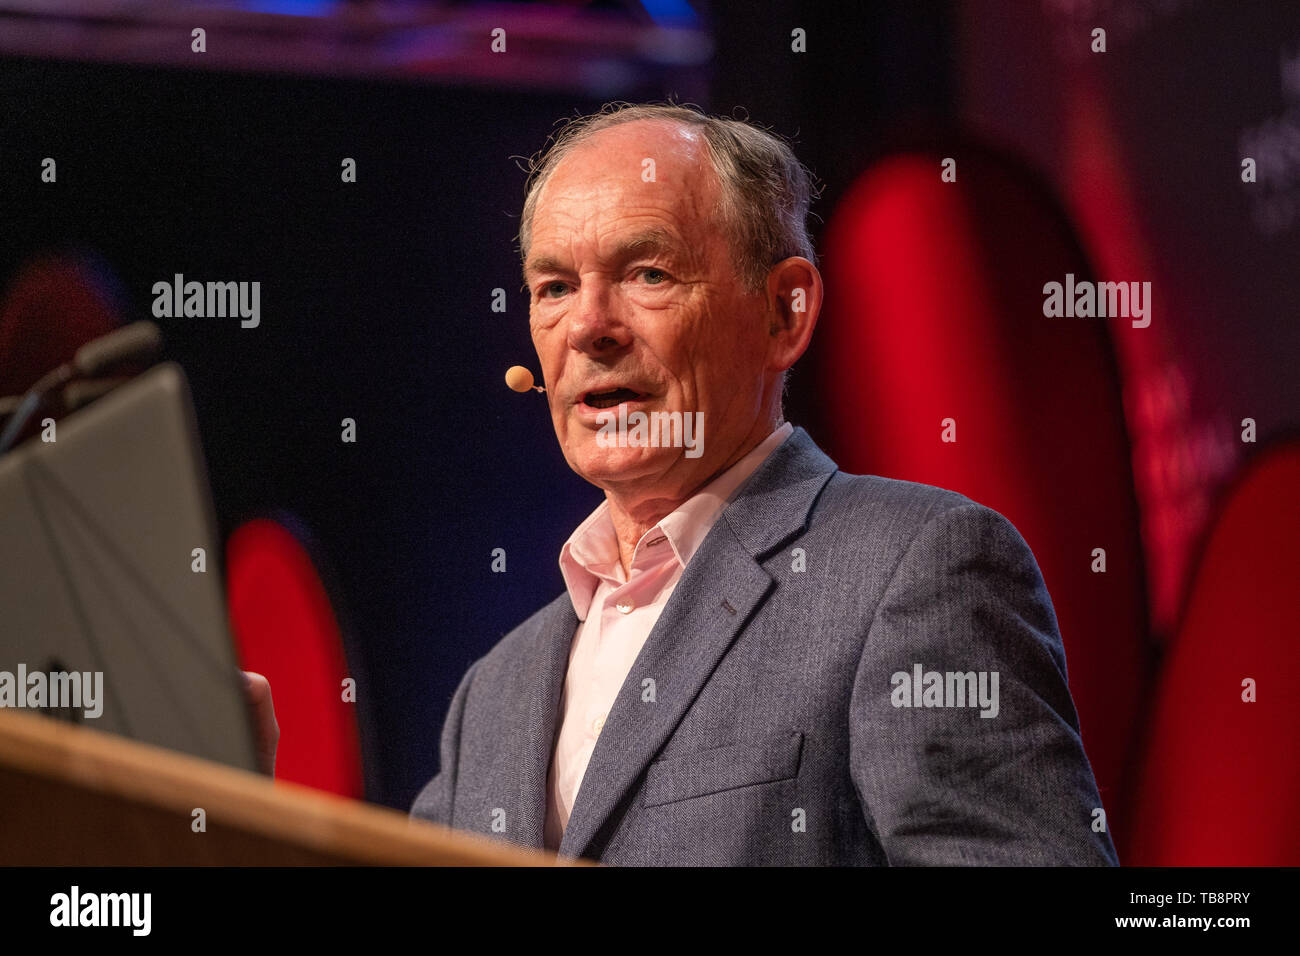 The Hay Festival, Hay on Wye, Wales UK , Friday 31st May 2019.  SIMON JENKINS, historian, journalist and broadcaster, talking about his book ‘ From Pericles to Putin: a short history of Europe’  on stage at the Hay Festival 2019.  The festival, now in its 32nd year, held annually in the small town of Hay on Wye on the Wales - England border,  attracts the finest writers, politicians and intellectuals from  across the globe for 10 days of talks and discussions, celebrating the best of the written word and critical debate  Photo © Keith Morris / Alamy Live News Stock Photo